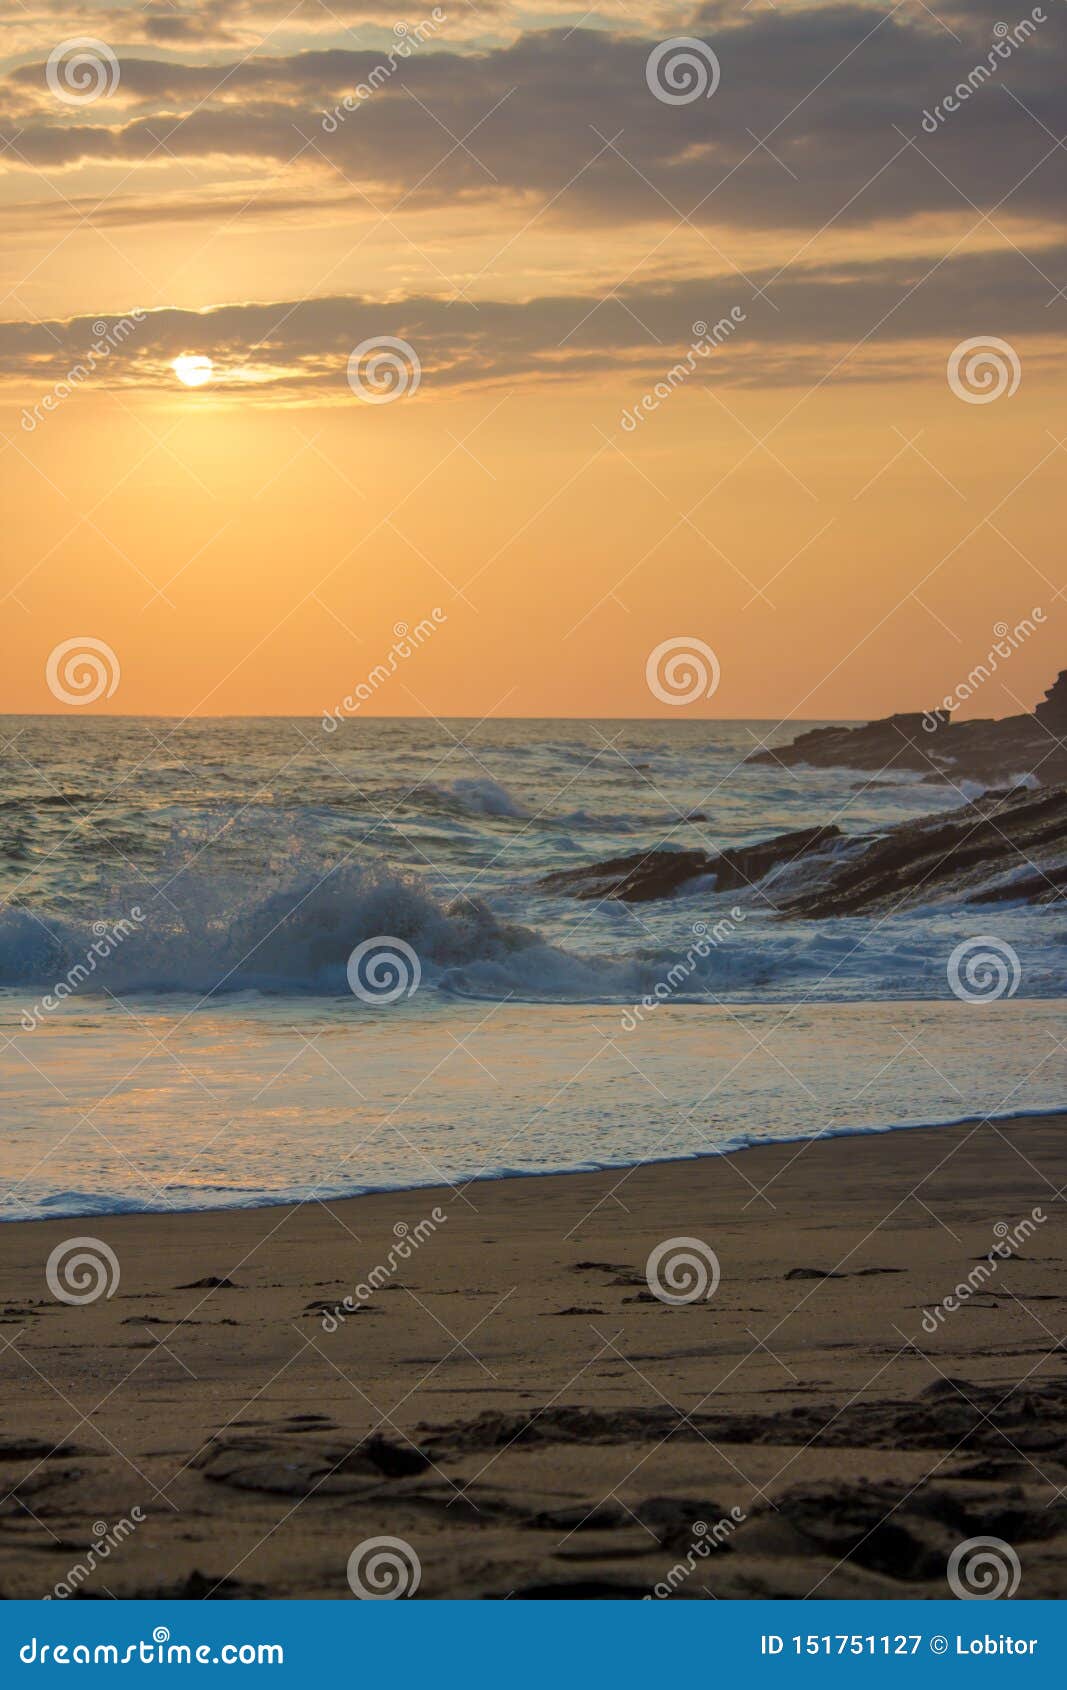 wave and sunset from punta cometa oaxaca mexico